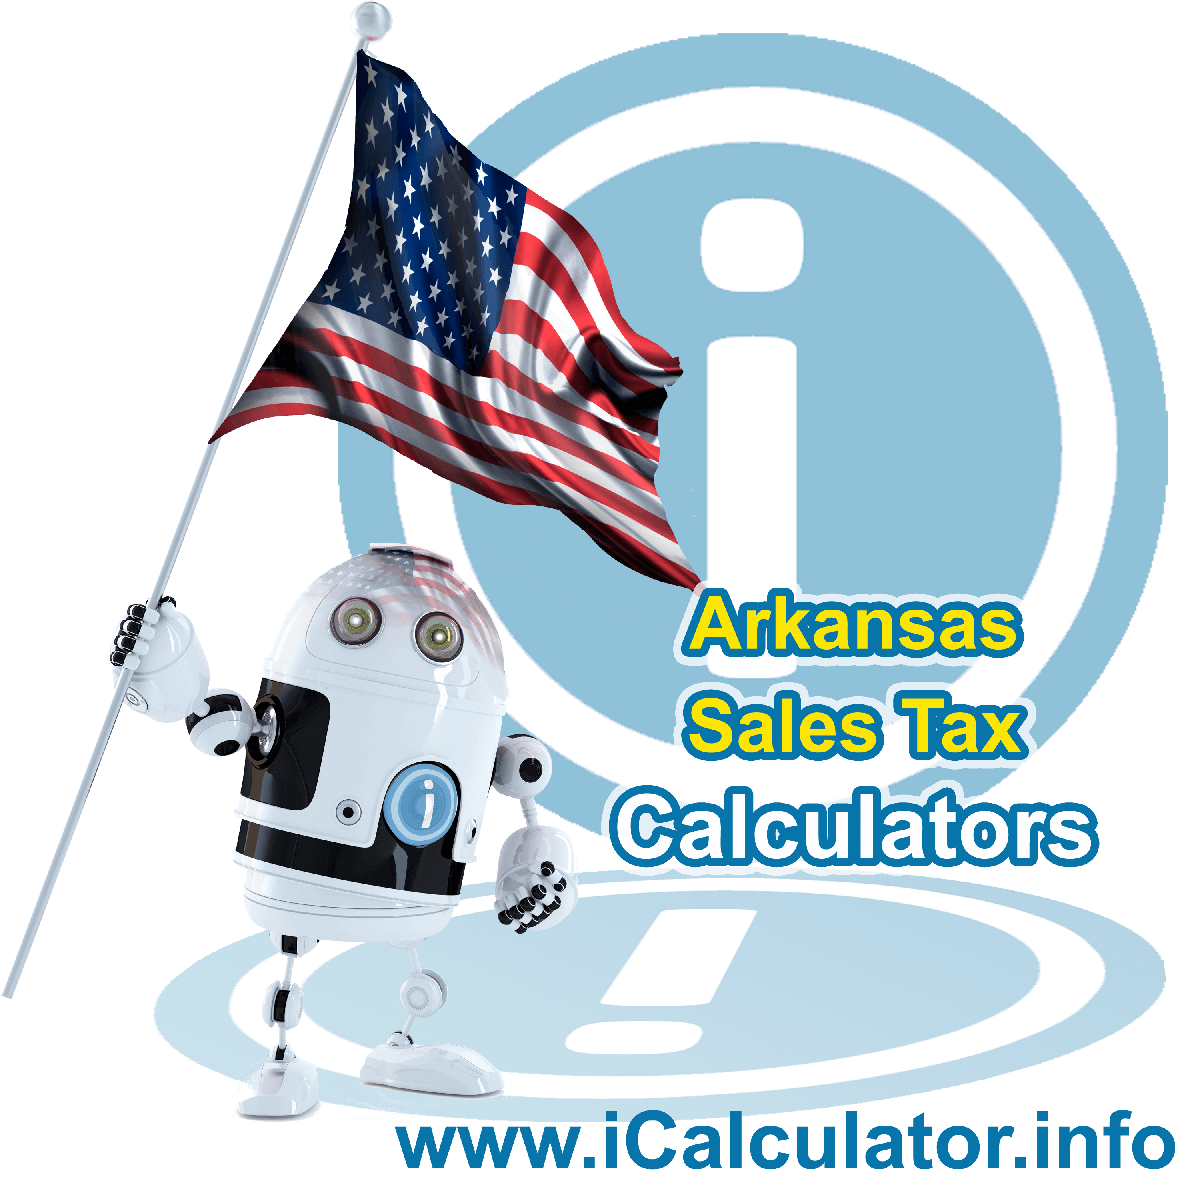 Lowell Sales Rates: This image illustrates a calculator robot calculating Lowell sales tax manually using the Lowell Sales Tax Formula. You can use this information to calculate Lowell Sales Tax manually or use the Lowell Sales Tax Calculator to calculate sales tax online.